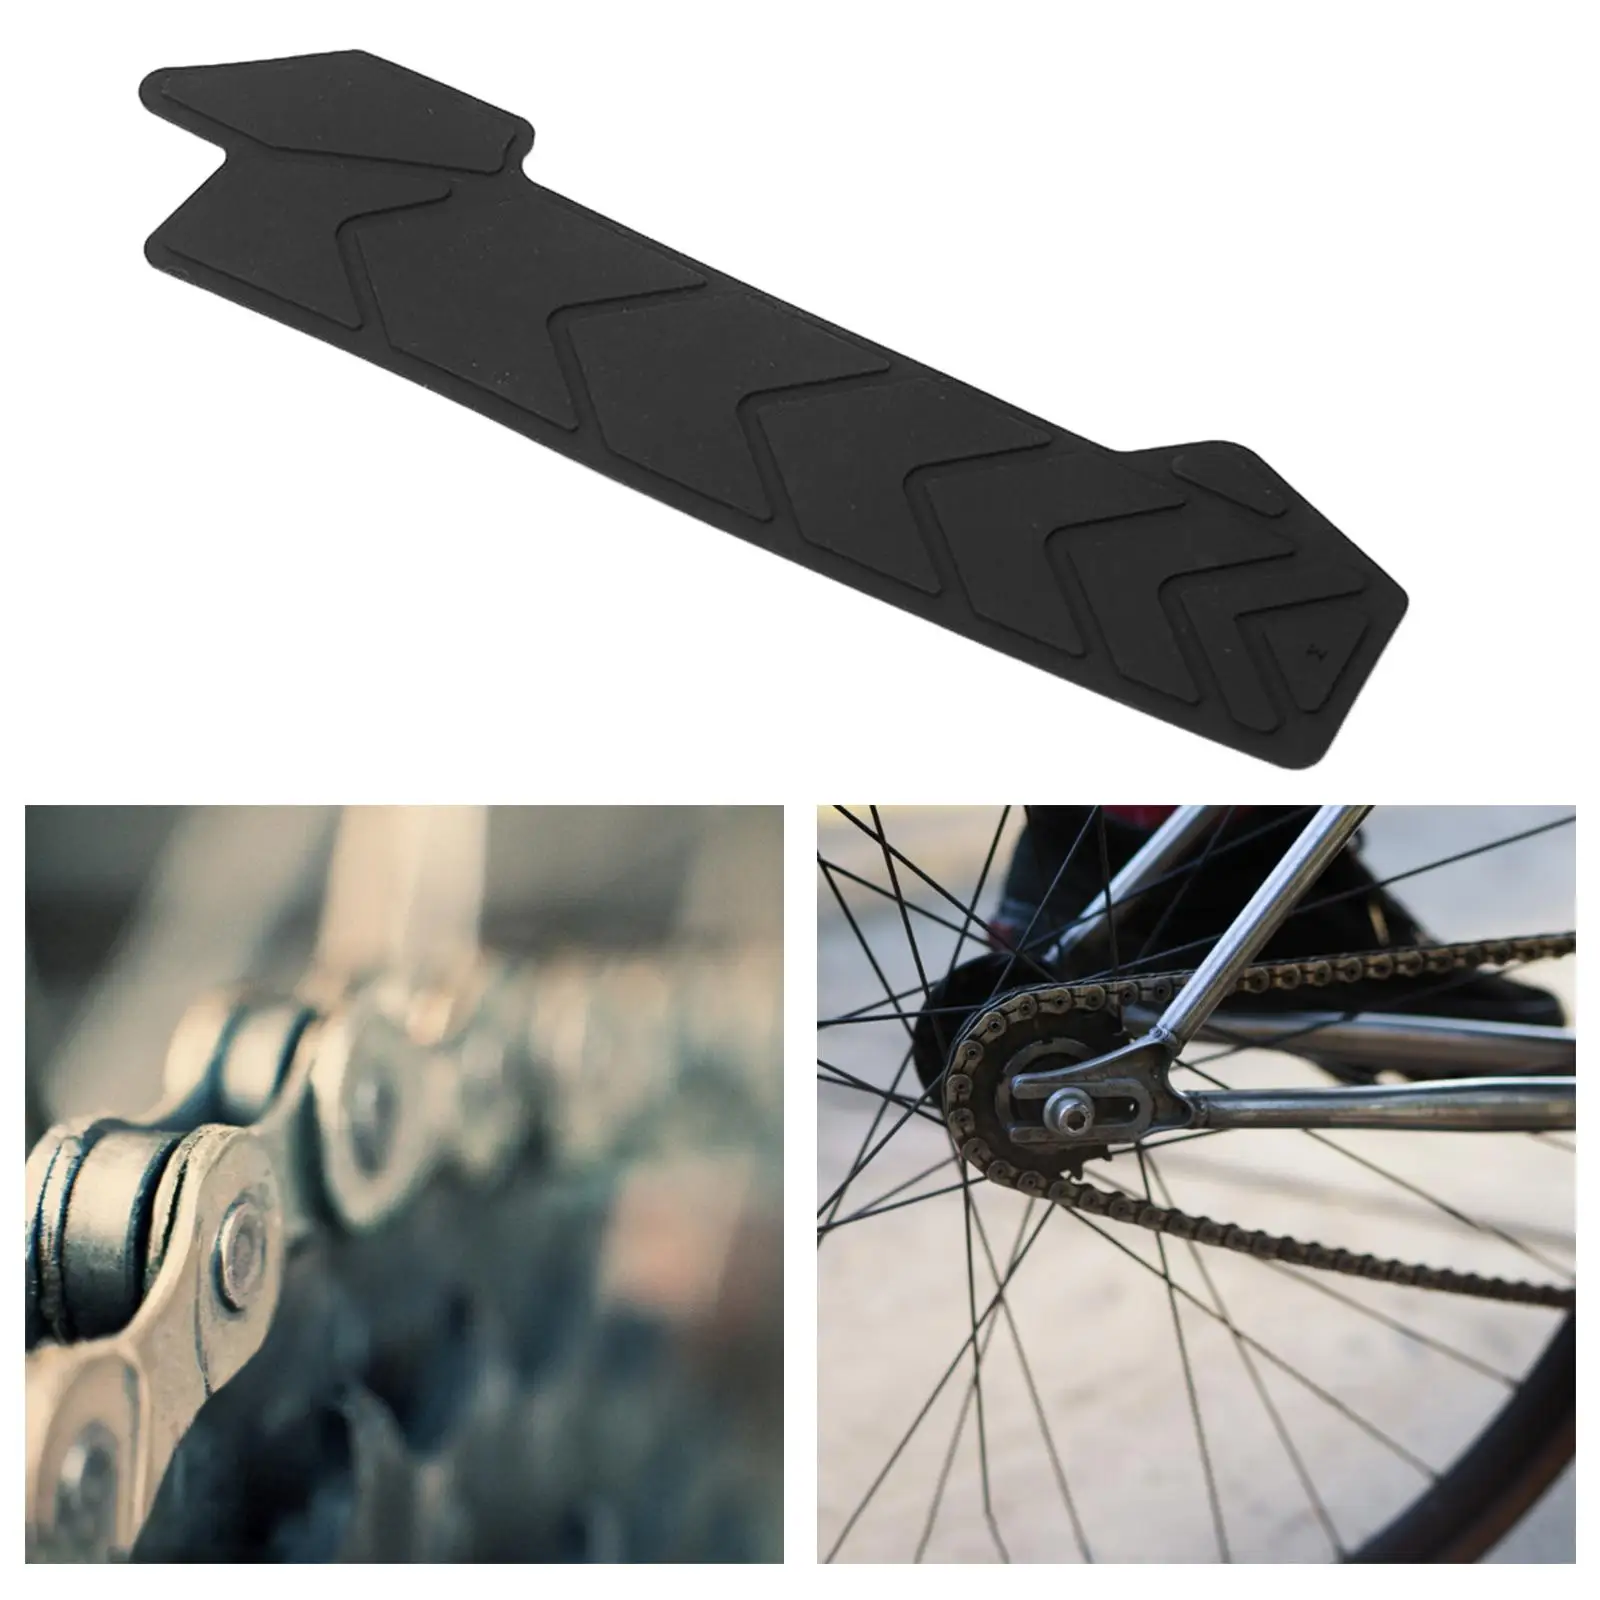 Chain Protector Guard Scratch Resistant Bike Accessories Protective Gear Pad Cover